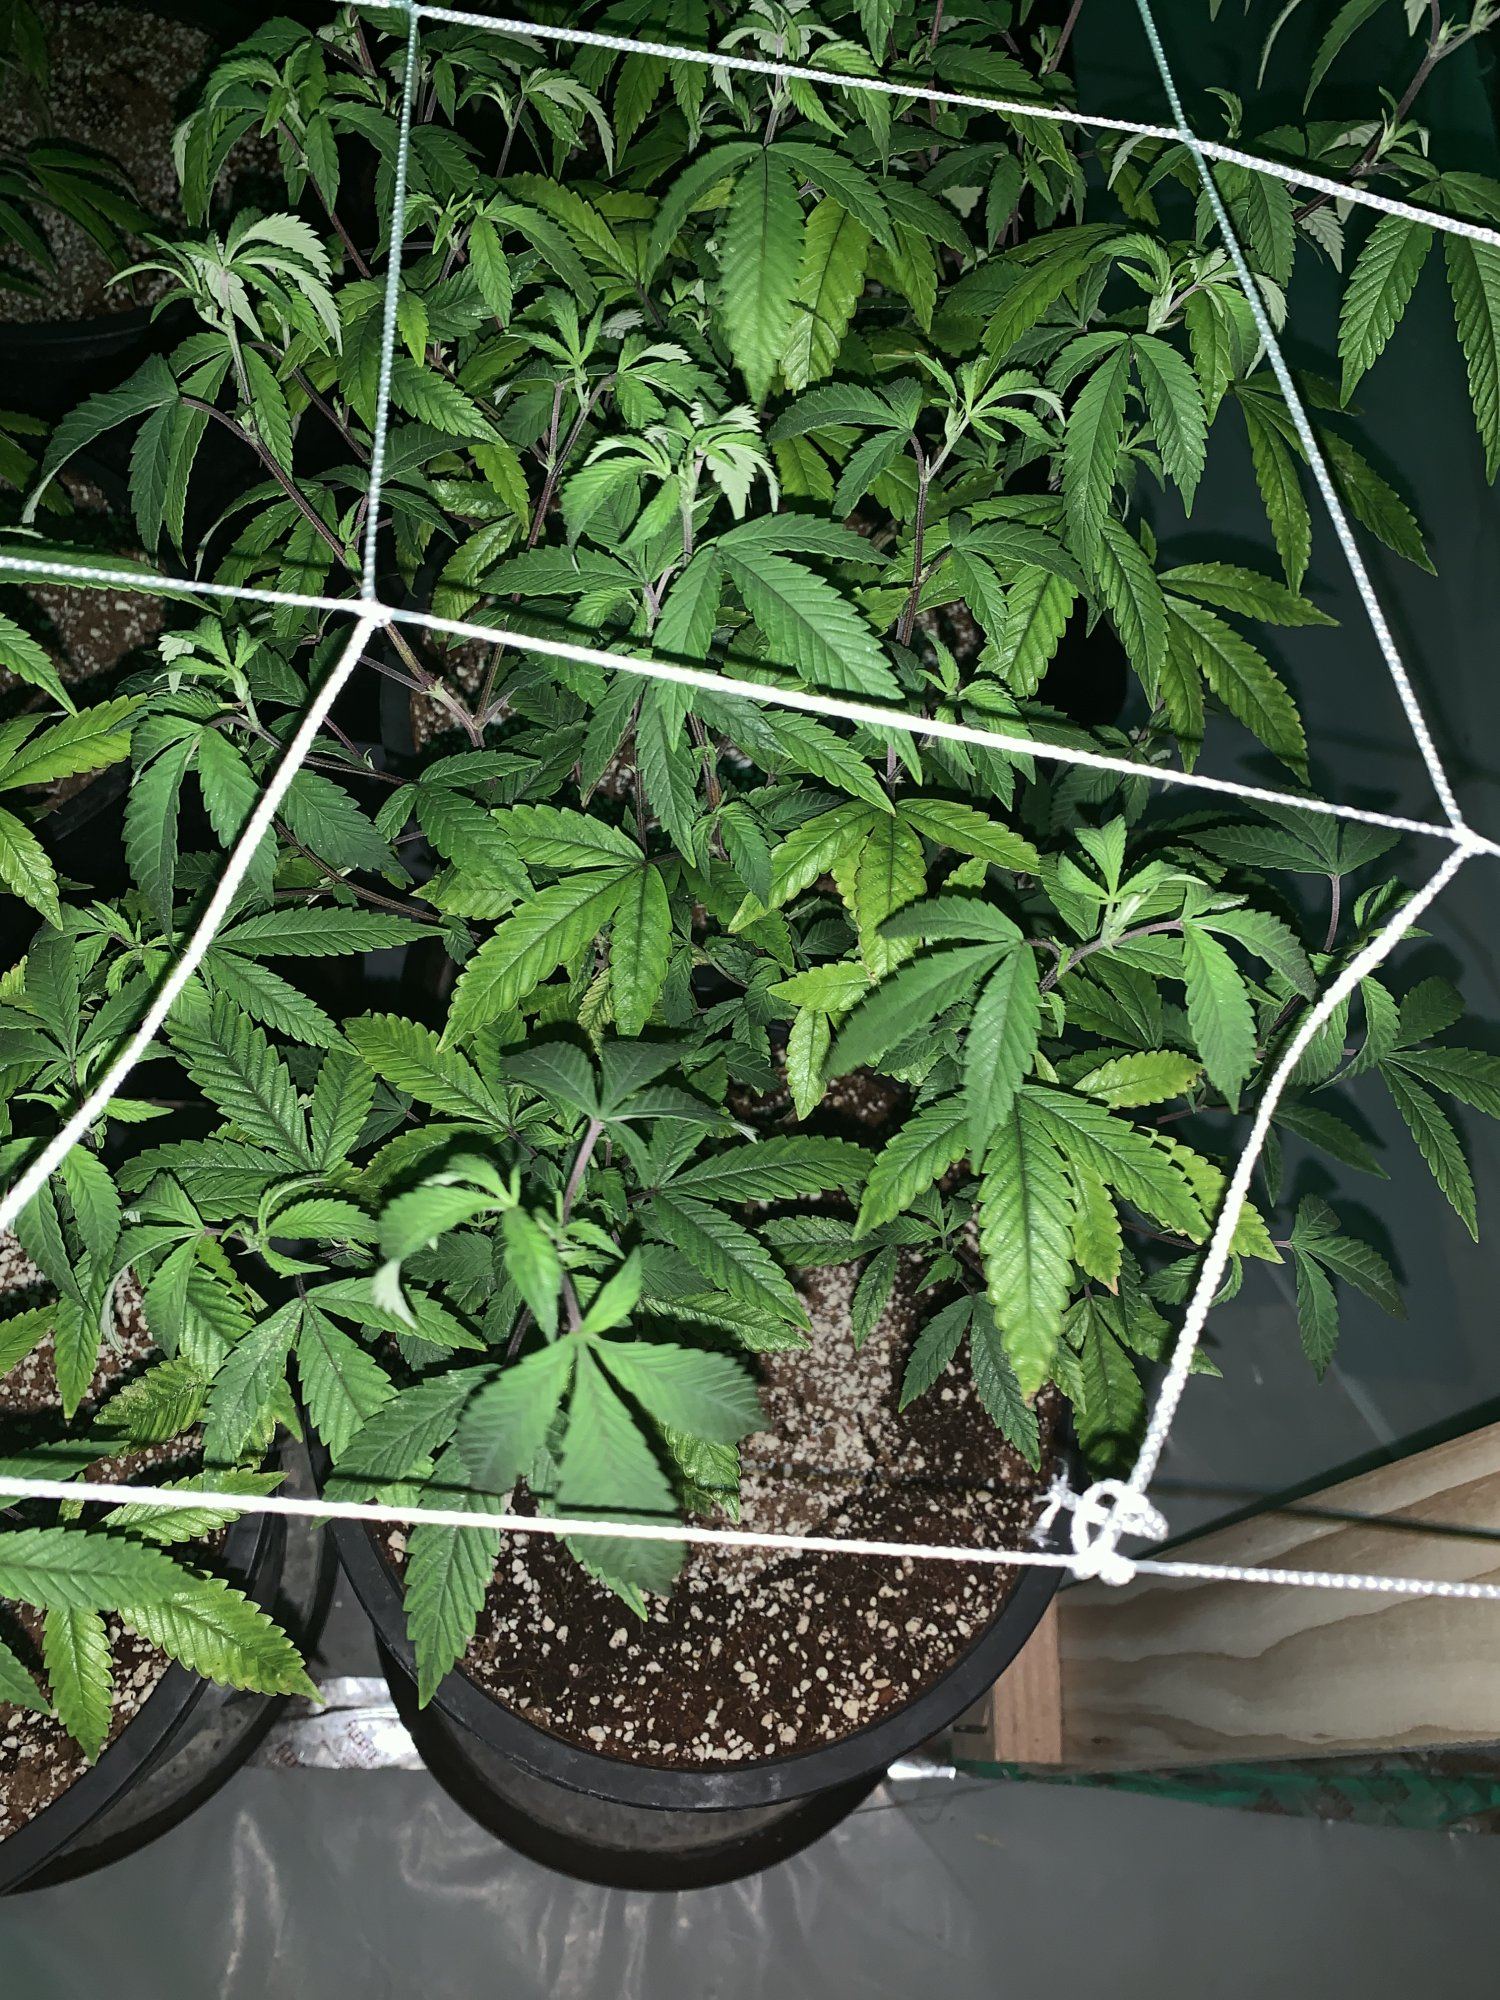 Stunted growth during veg how to fix